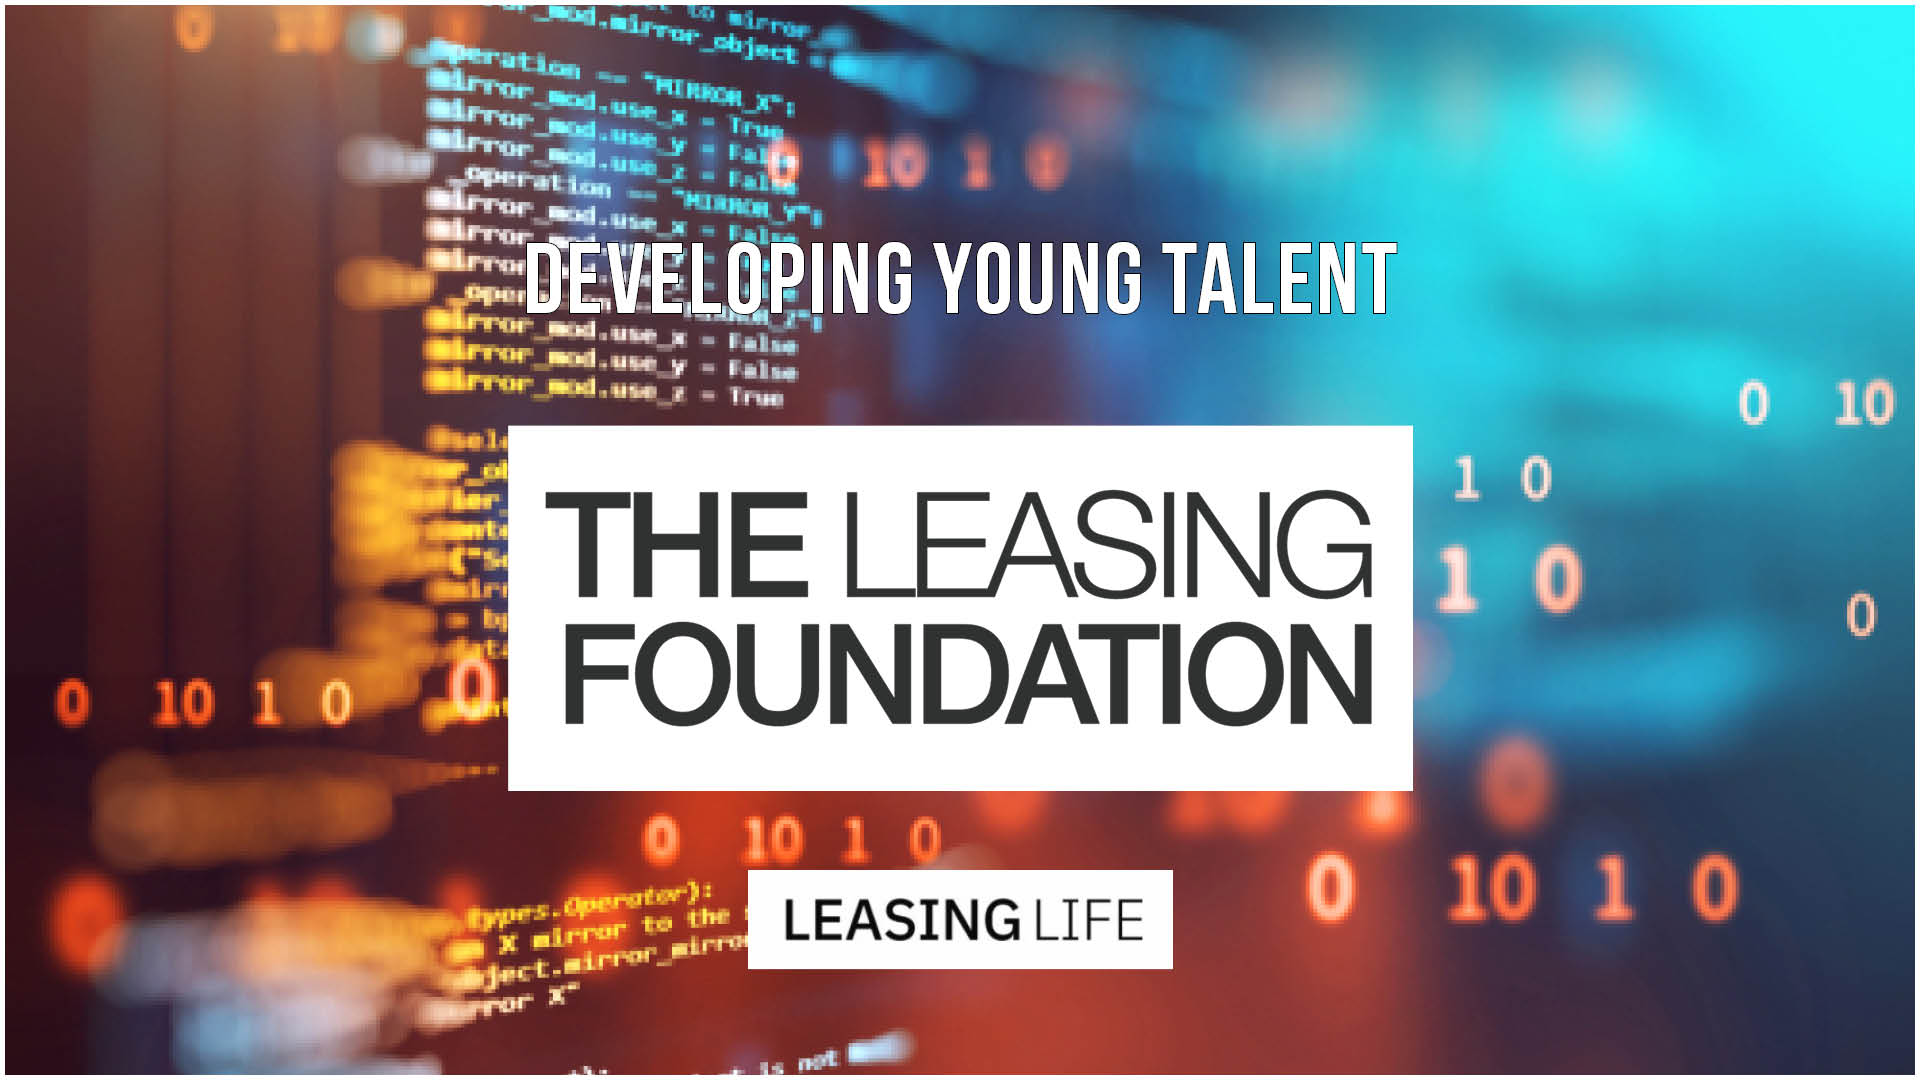 Leasing Foundation launches programme to foster young talent